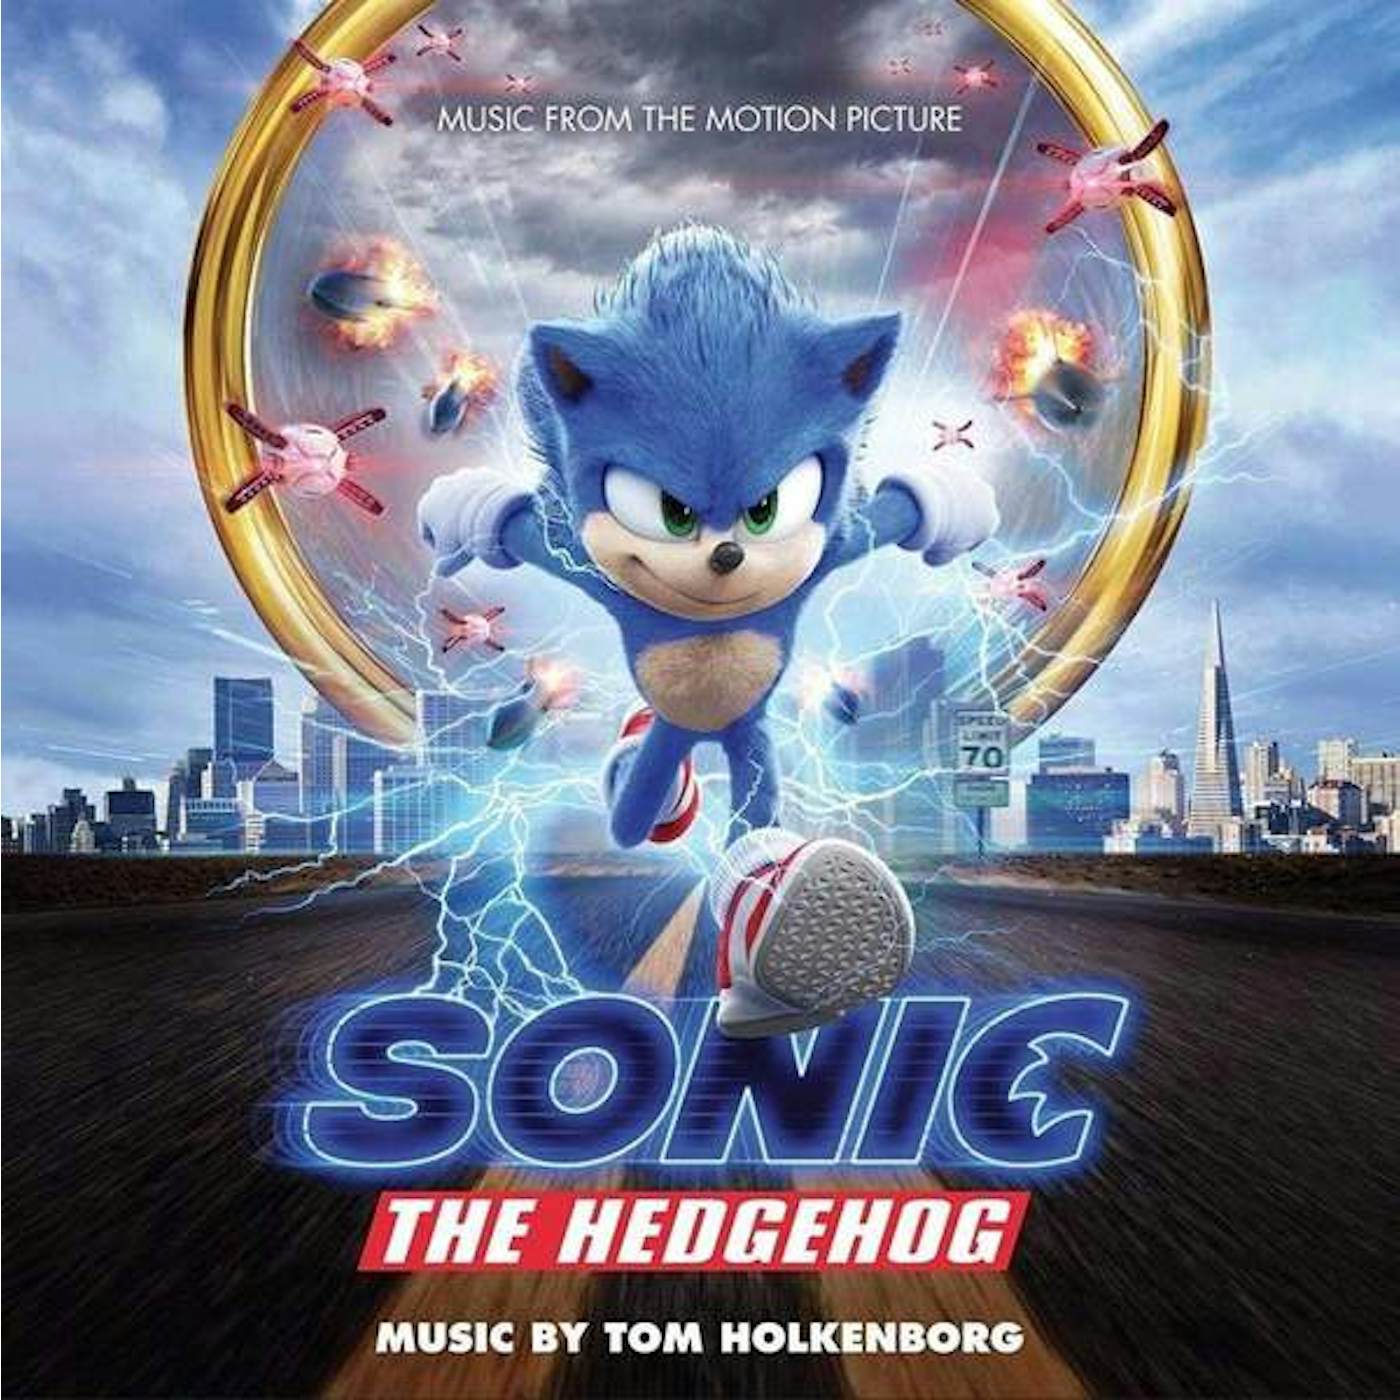 Junkie XL SONIC THE HEDGEHOG: MUSIC FROM THE MOTION PICTURE Vinyl Record